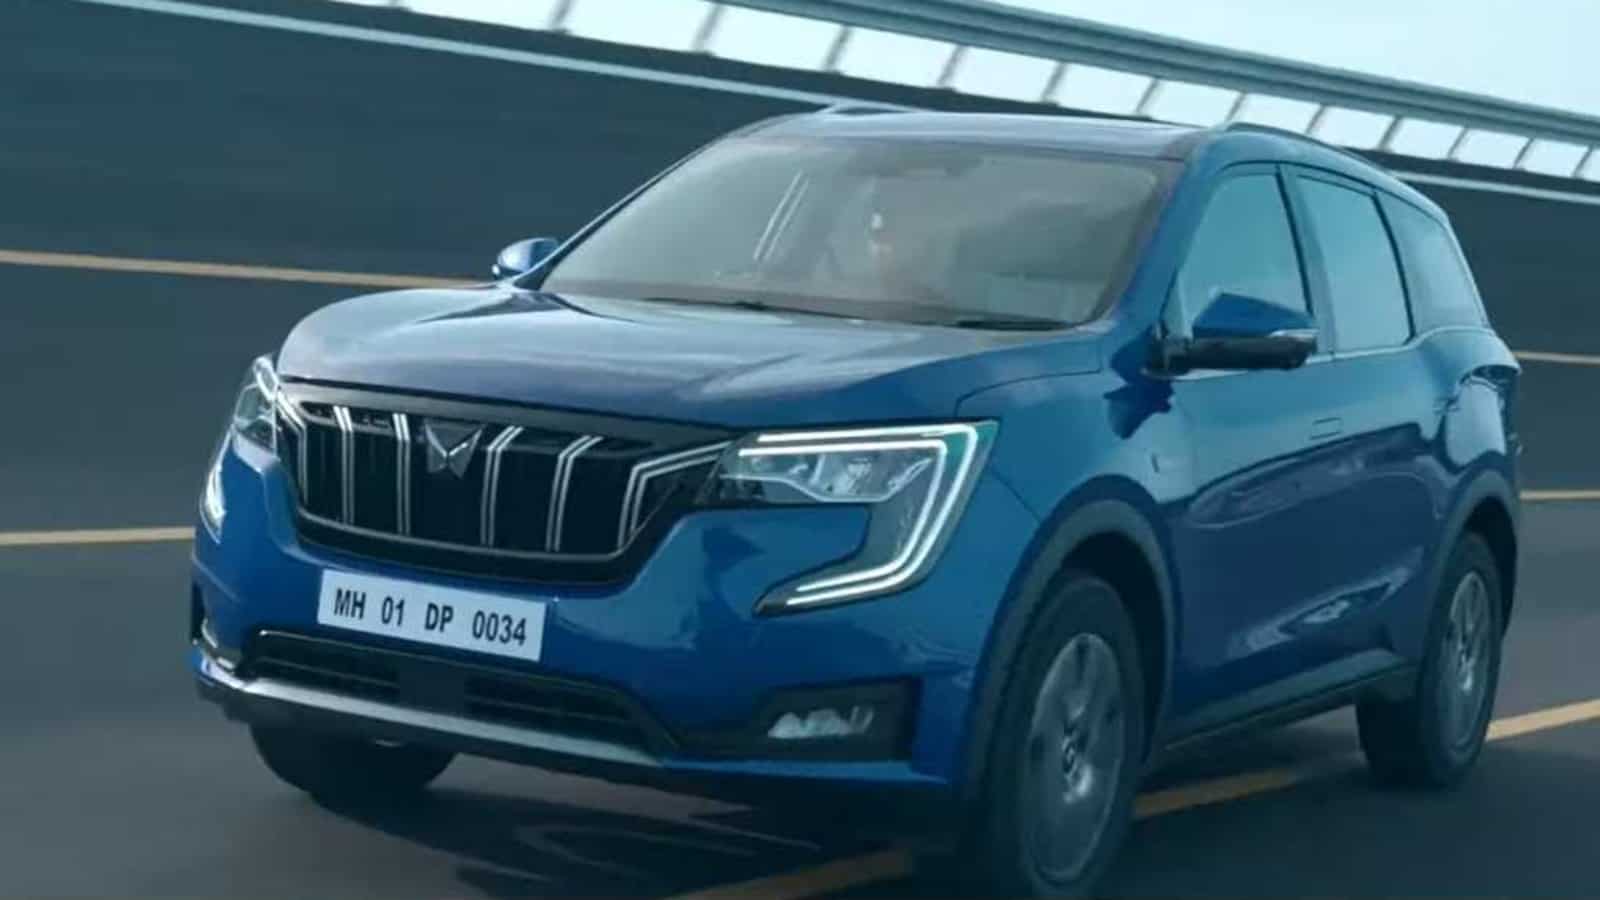 Mahindra XUV700 offered with starting price of ₹11.99 lakh. Details here